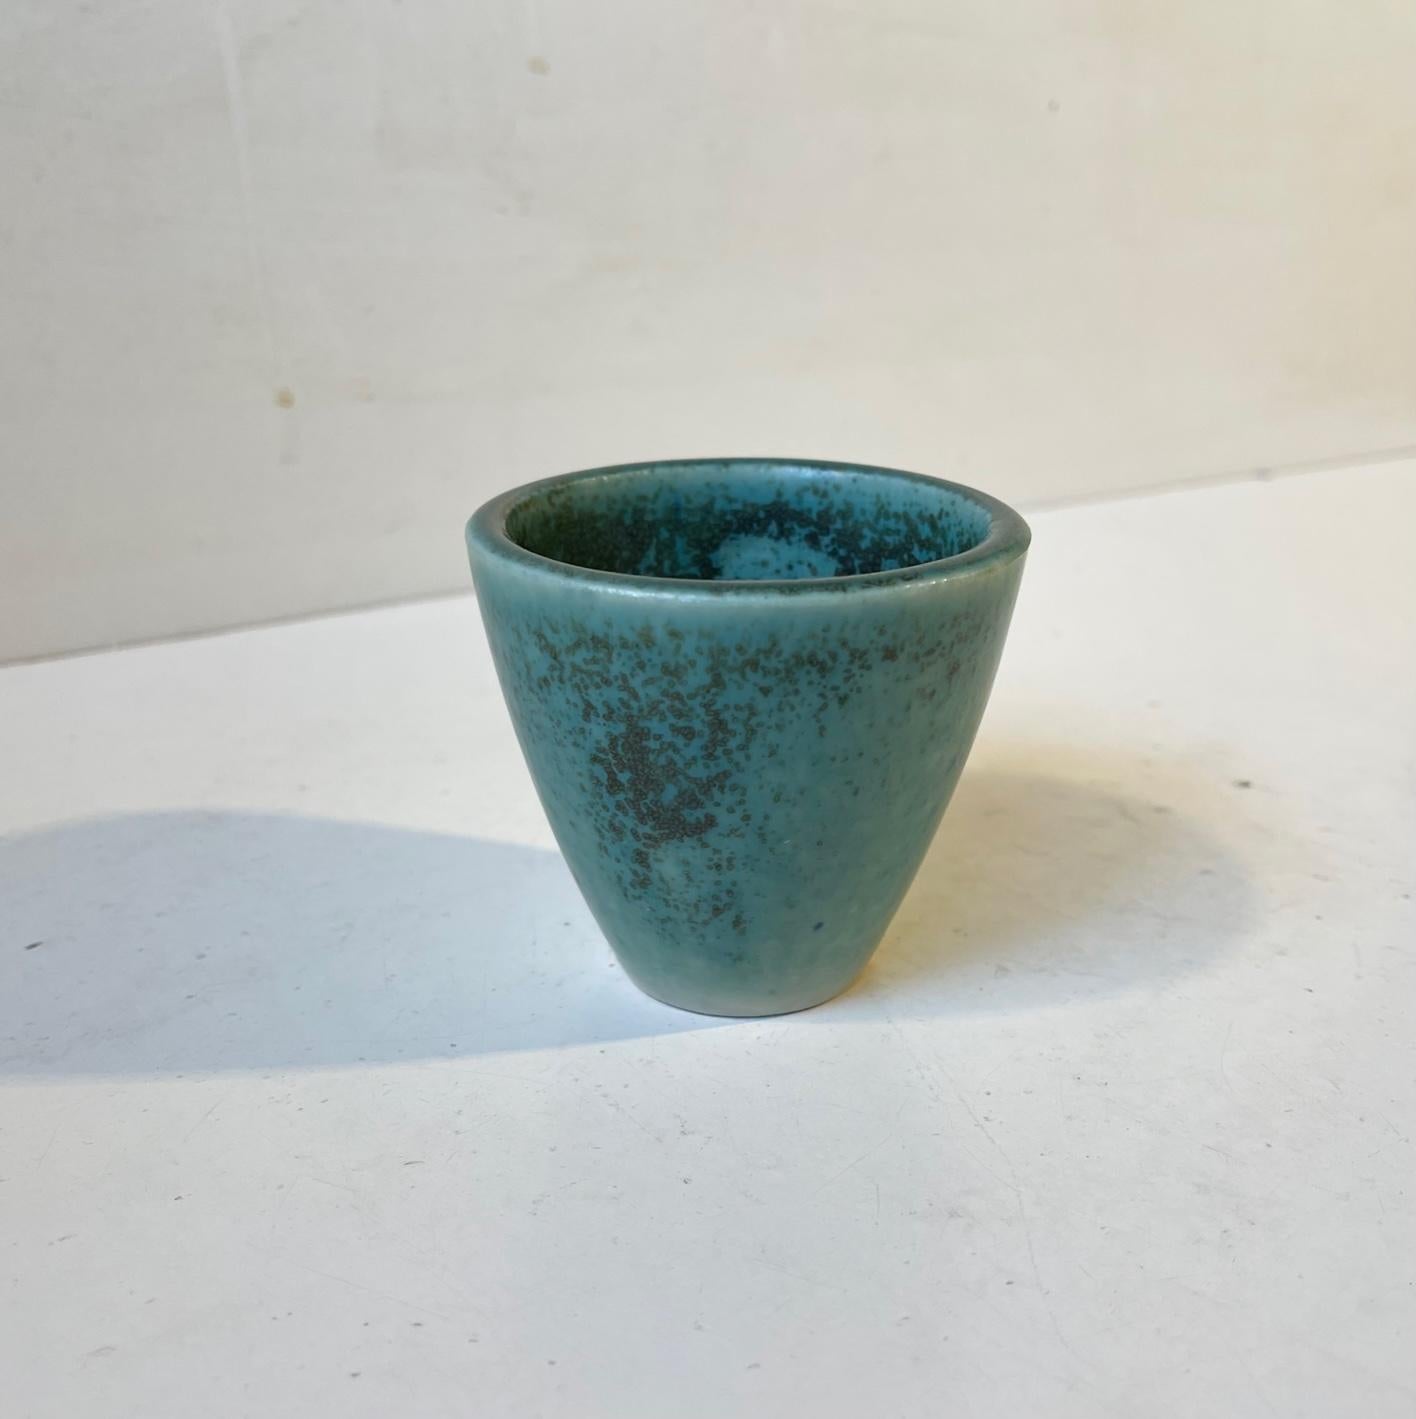 Small conical vase executed with spotted teal green hares fur type glaze. It is a a rare one made at Saxbo in Denmark during the 1950s as a glaze sample prior to a larger volume. The vase is marked with the glaze sample number: 1A and does not have